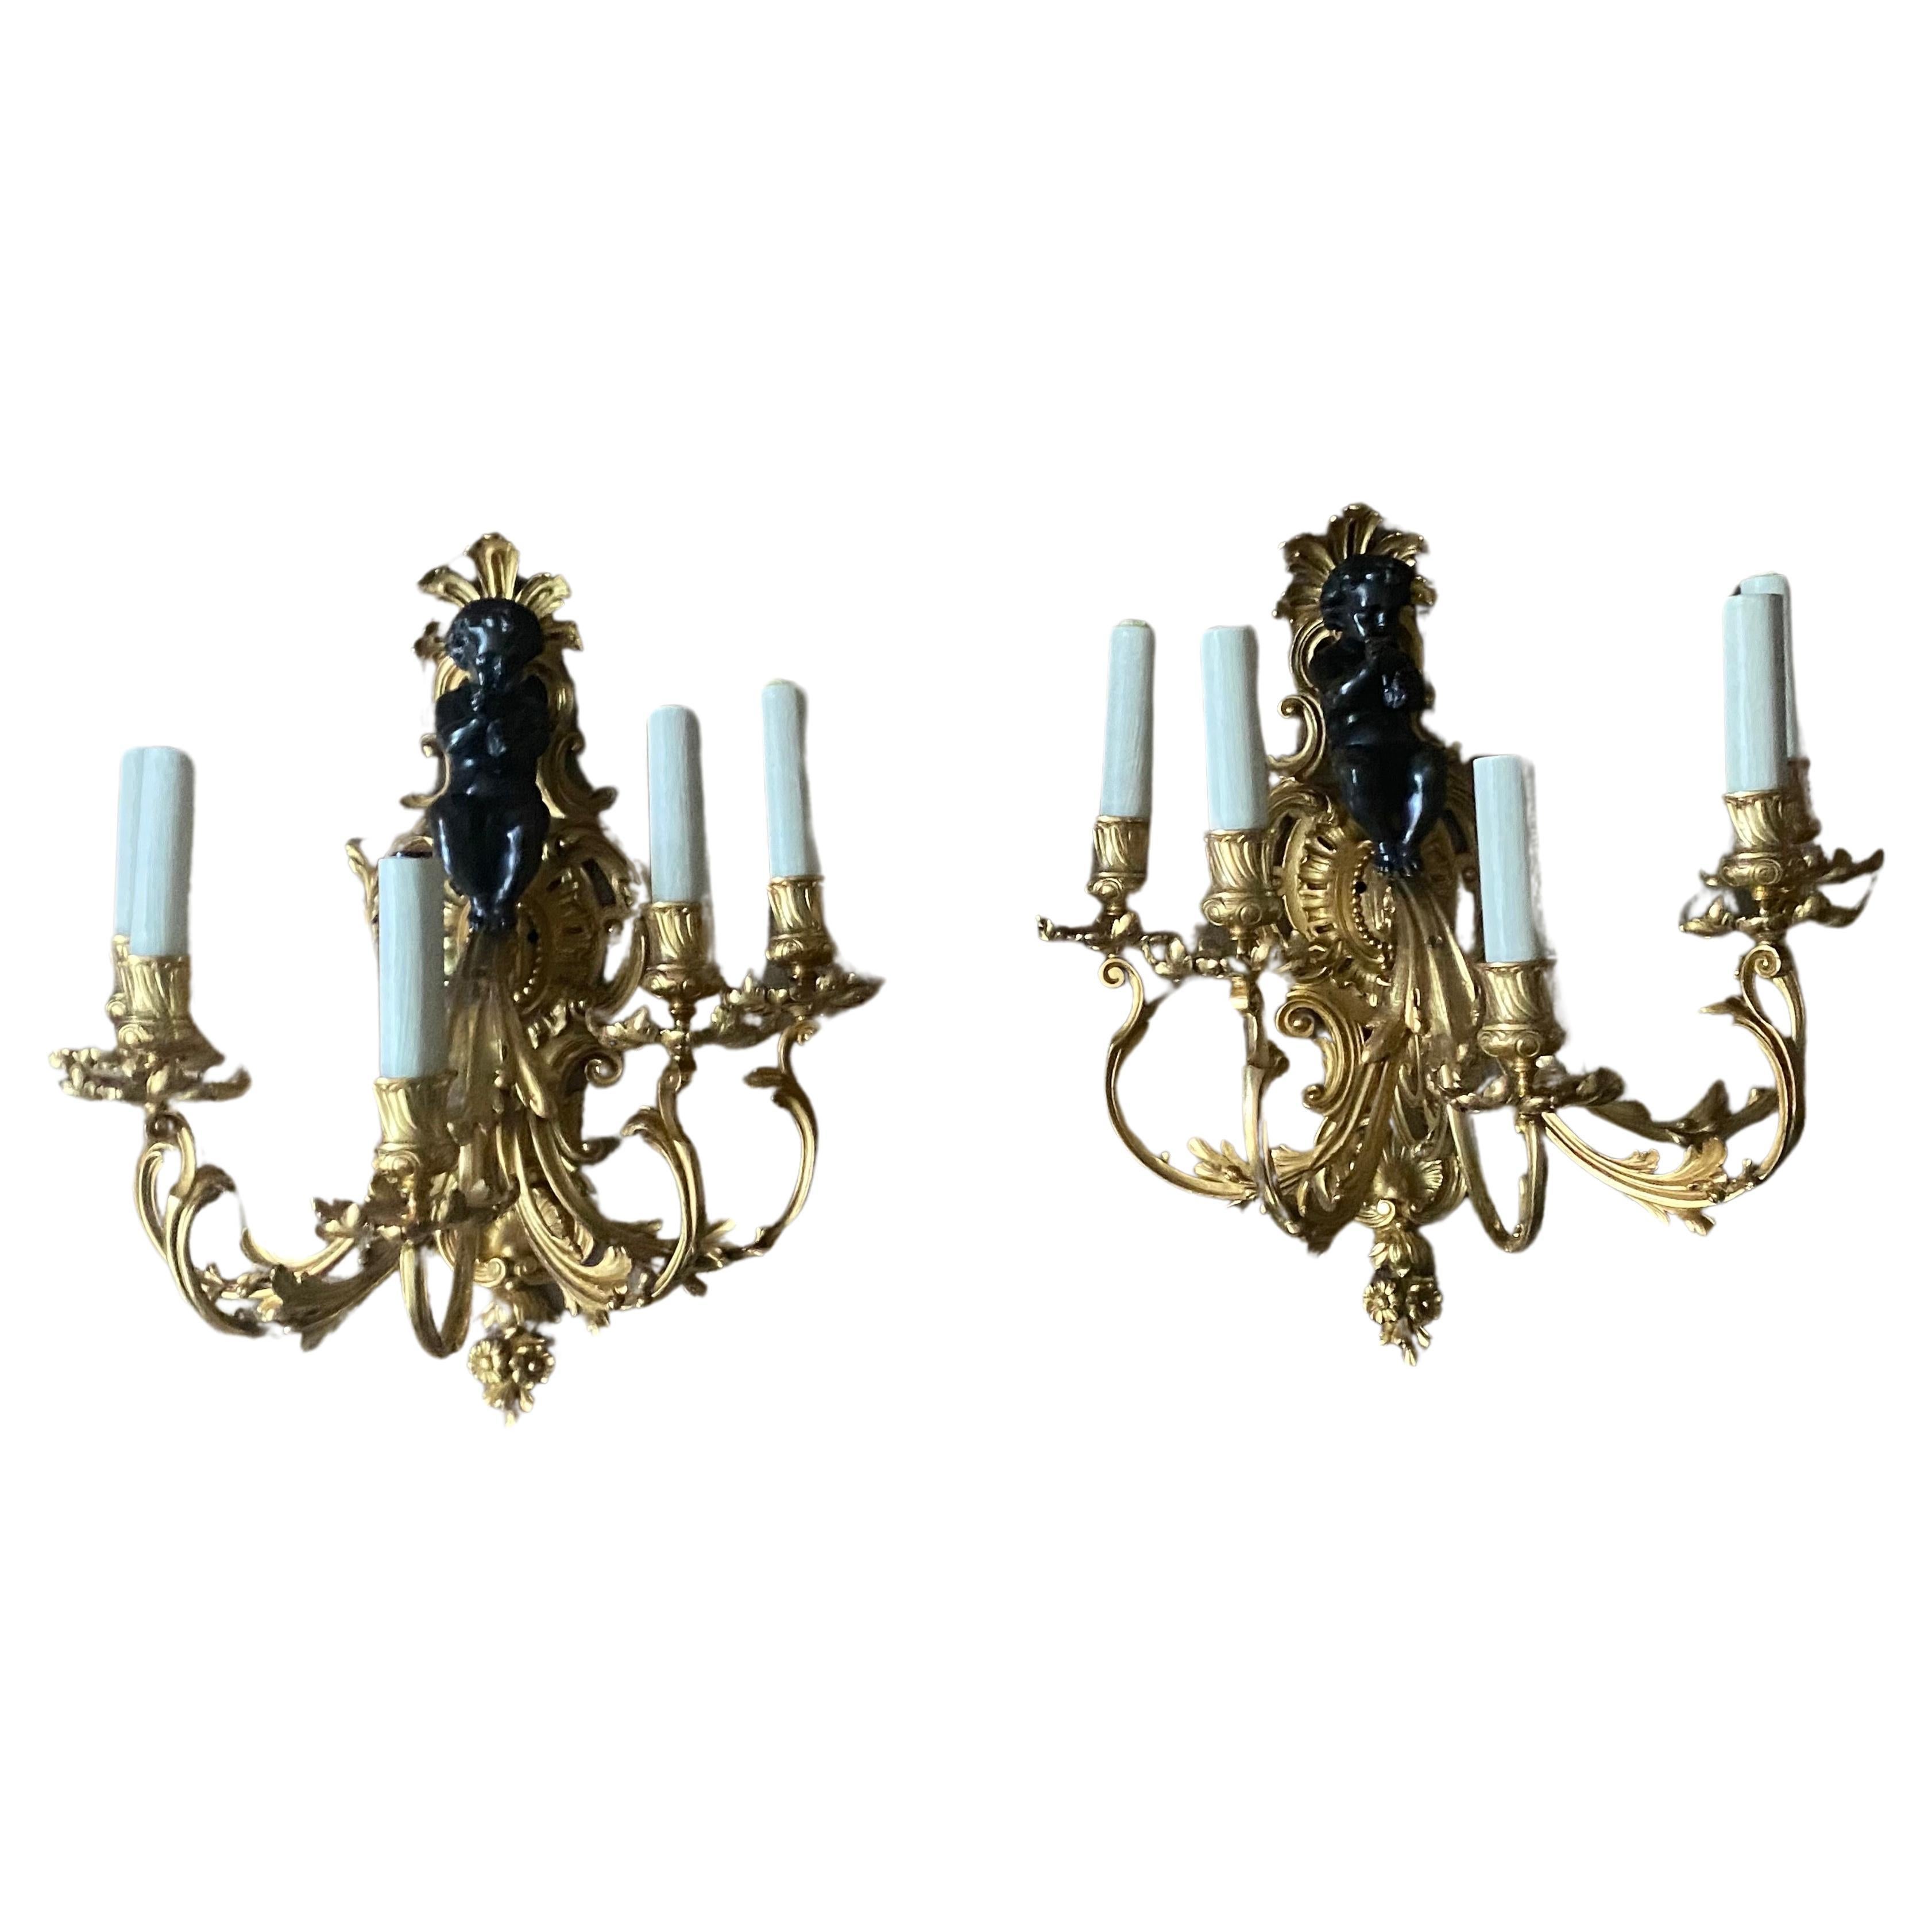 A Large Pair of 19th Century French Gilt Bronze Dore Cherub Wall Sconces For Sale 10